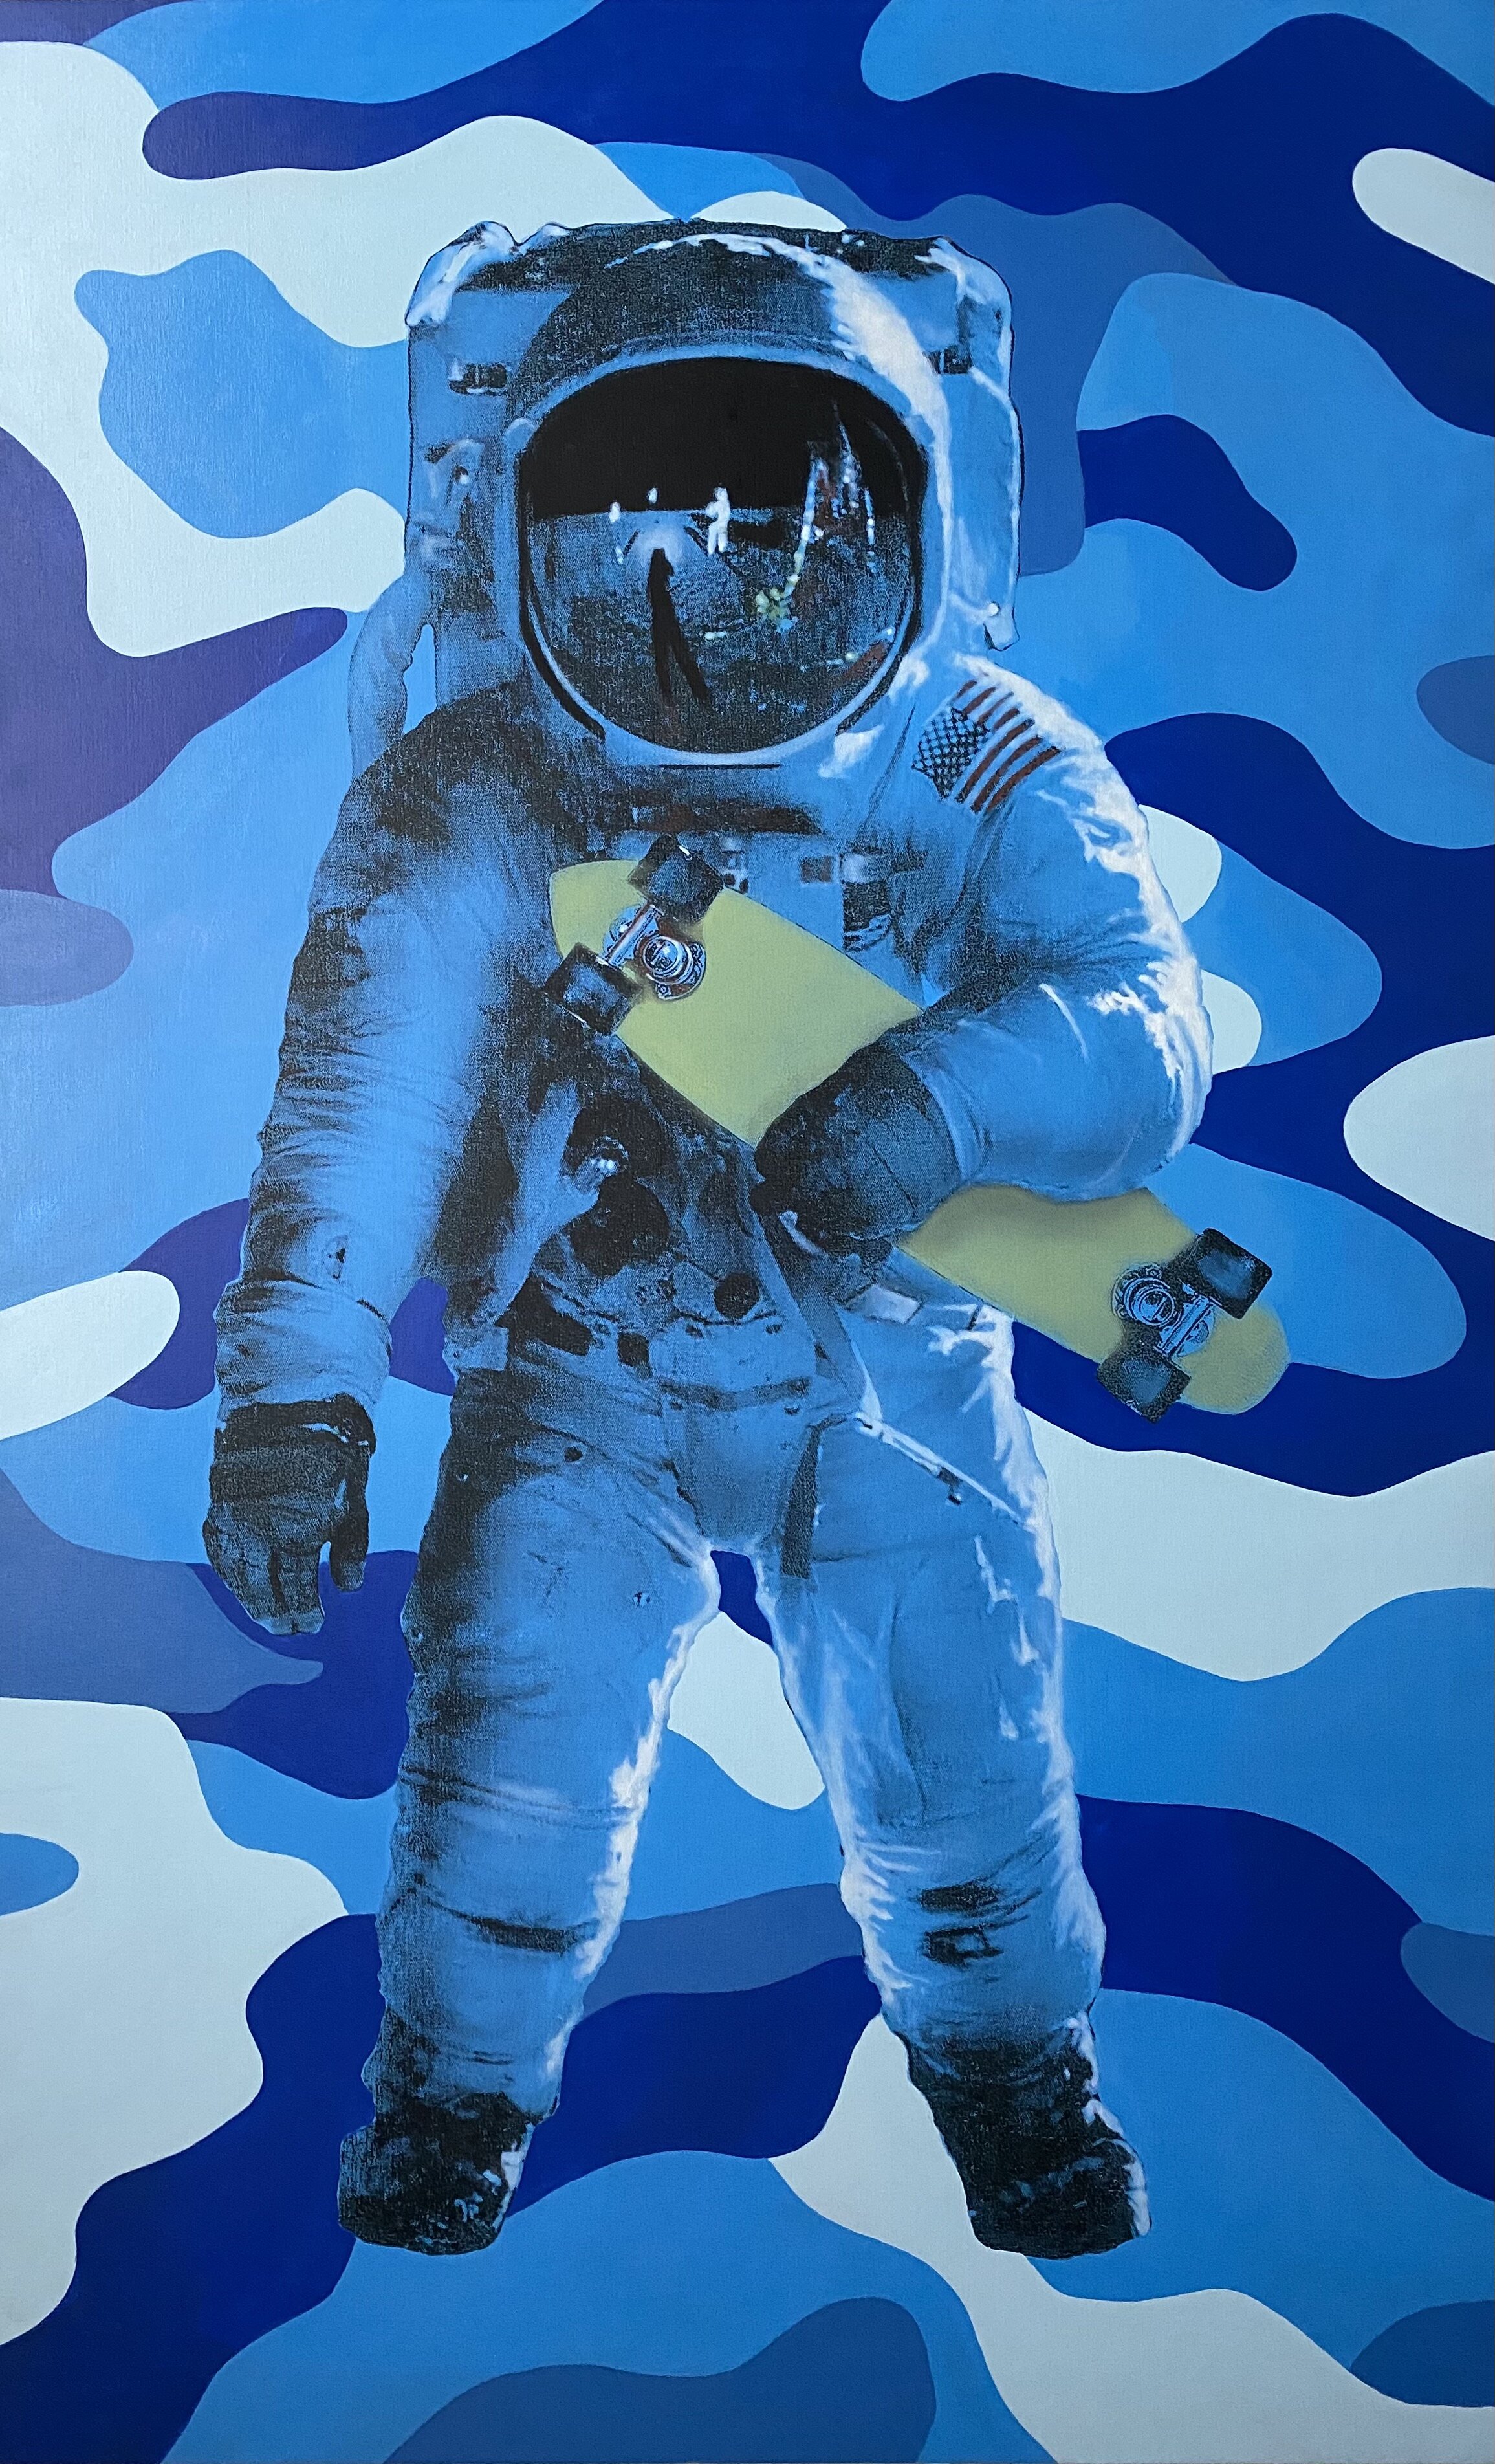   Camo Spaceboarder (Blue), 2021   Screen print and acrylic on canvas, 78 x 48 inches 